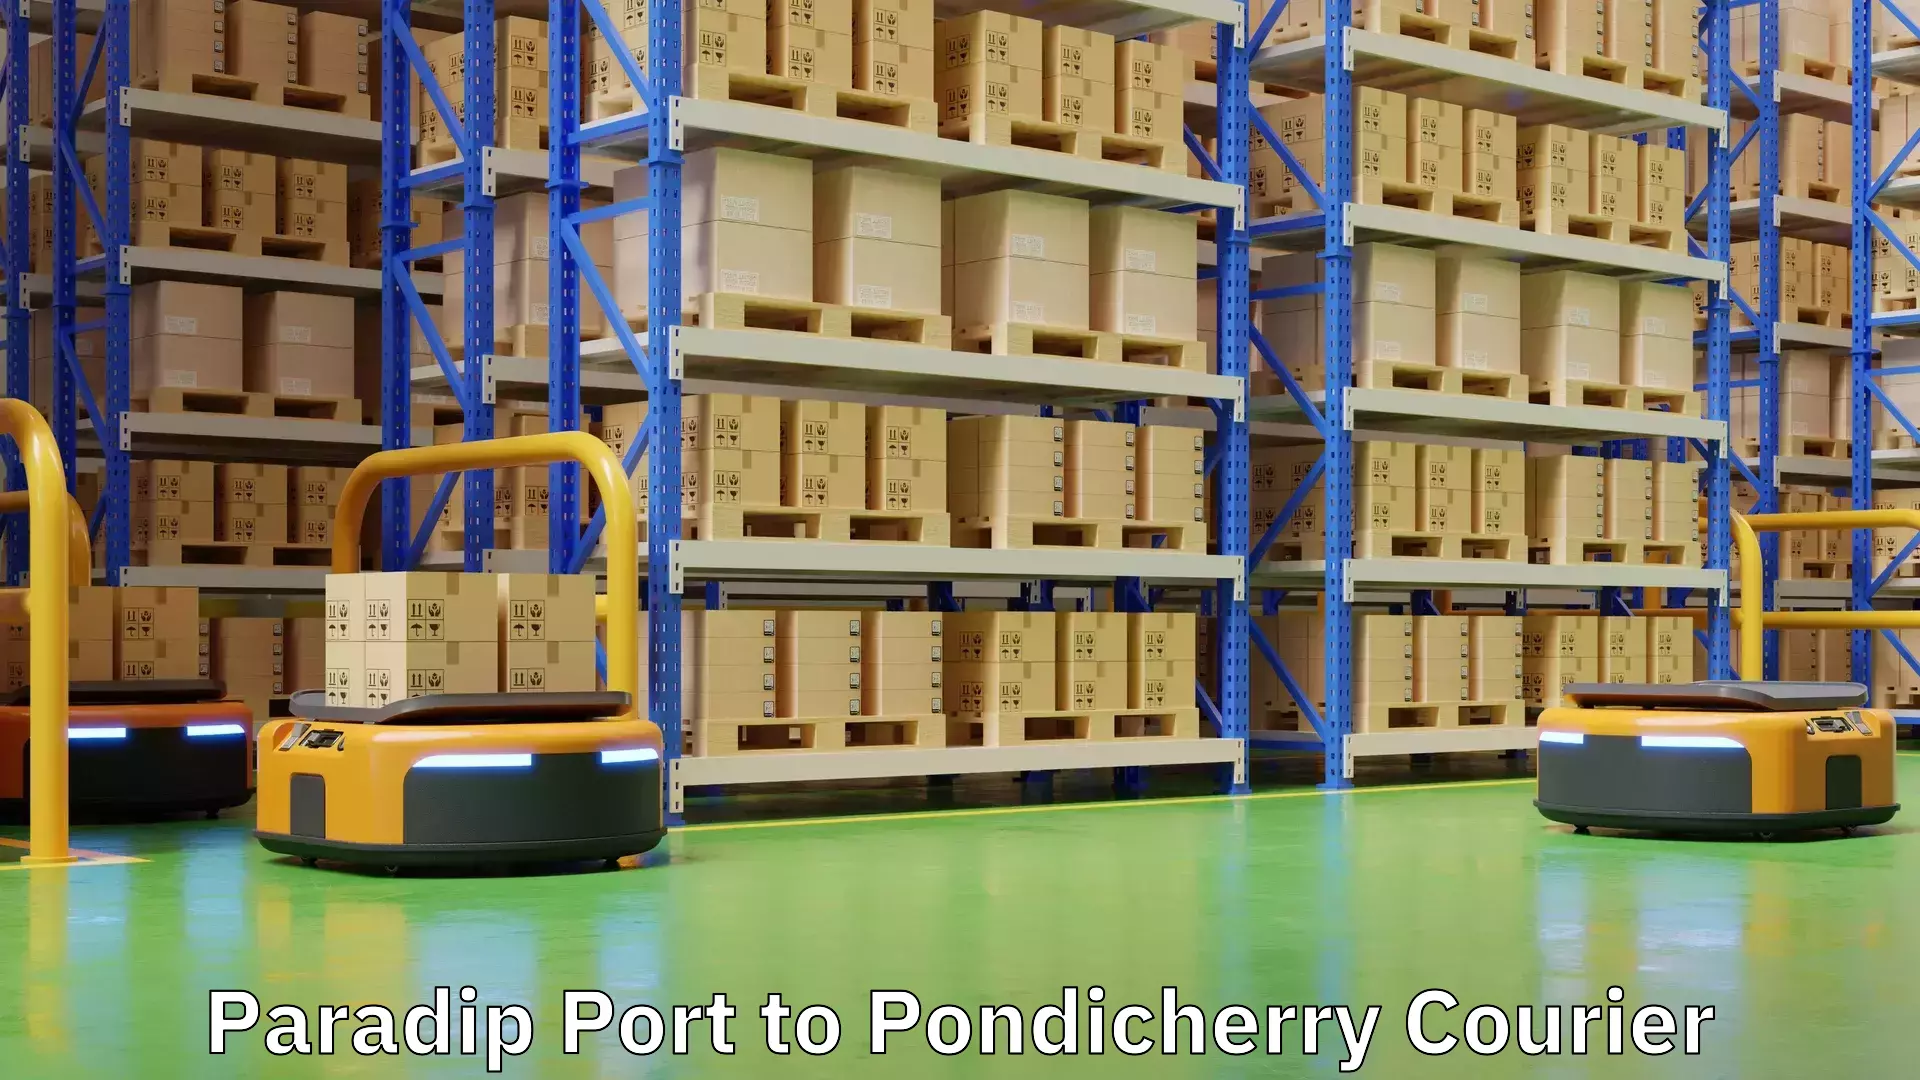 Fast delivery service in Paradip Port to Pondicherry